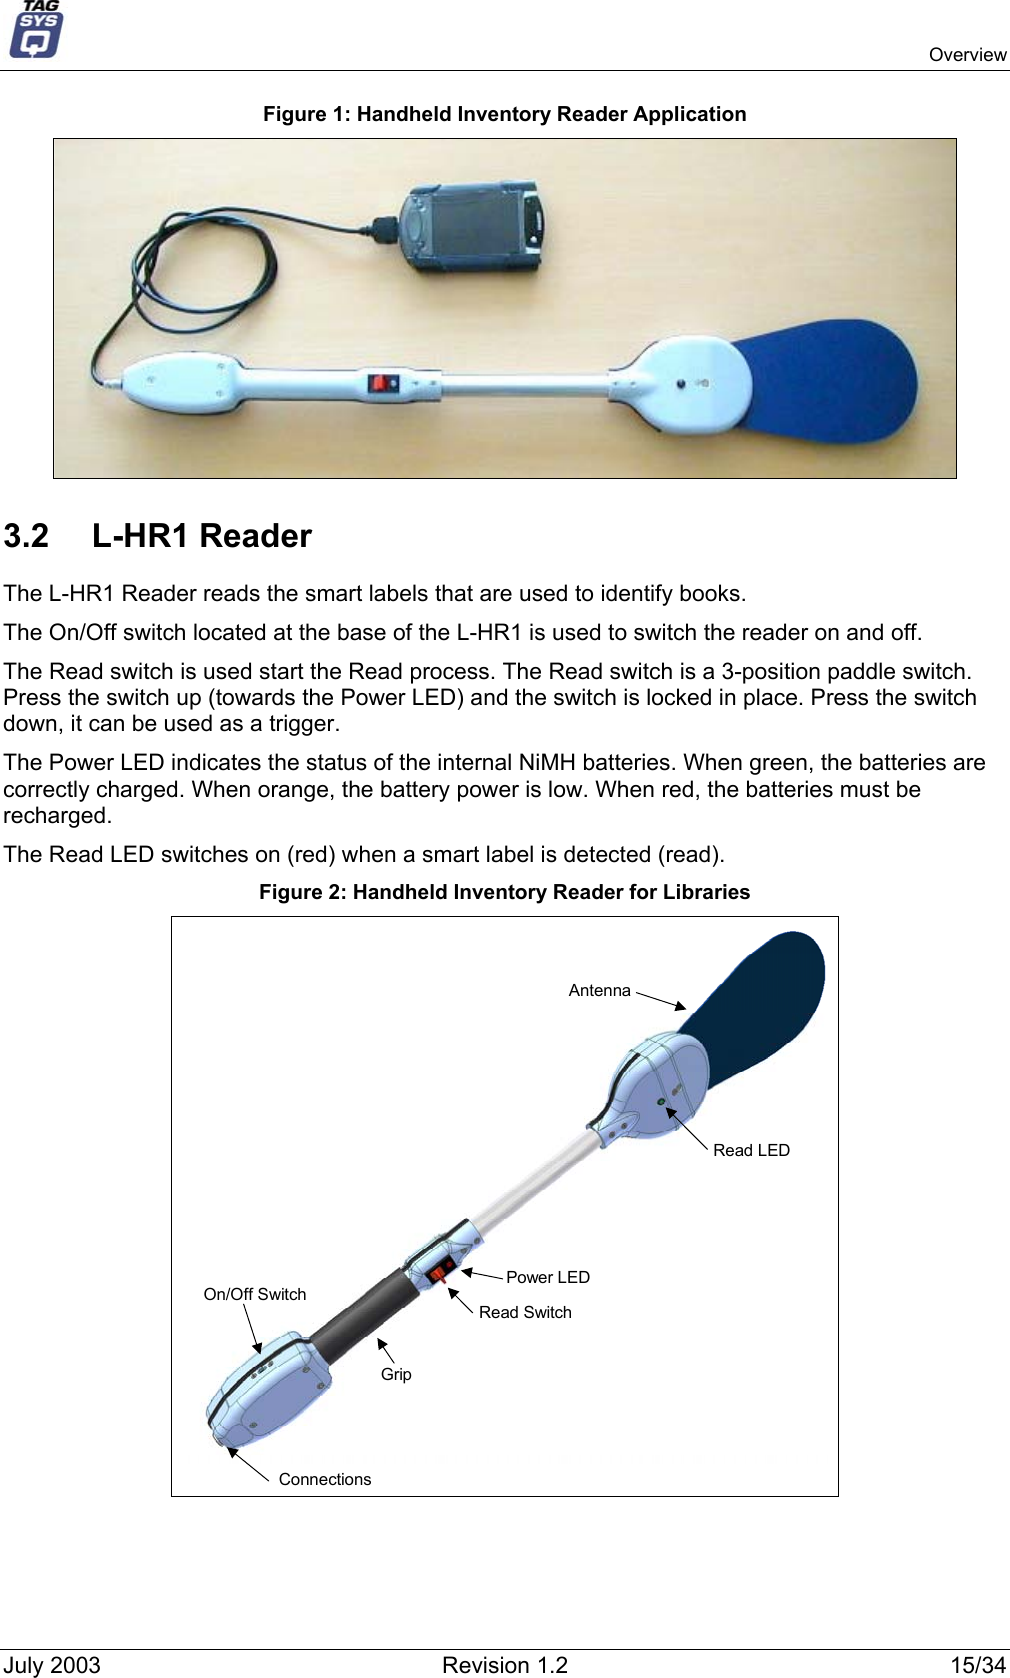   Overview Figure 1: Handheld Inventory Reader Application  3.2 L-HR1 Reader The L-HR1 Reader reads the smart labels that are used to identify books. The On/Off switch located at the base of the L-HR1 is used to switch the reader on and off.  The Read switch is used start the Read process. The Read switch is a 3-position paddle switch. Press the switch up (towards the Power LED) and the switch is locked in place. Press the switch down, it can be used as a trigger.  The Power LED indicates the status of the internal NiMH batteries. When green, the batteries are correctly charged. When orange, the battery power is low. When red, the batteries must be recharged. The Read LED switches on (red) when a smart label is detected (read).  Figure 2: Handheld Inventory Reader for Libraries AntennaRead LEDPower LEDRead SwitchOn/Off SwitchConnectionsGrip July 2003  Revision 1.2  15/34 